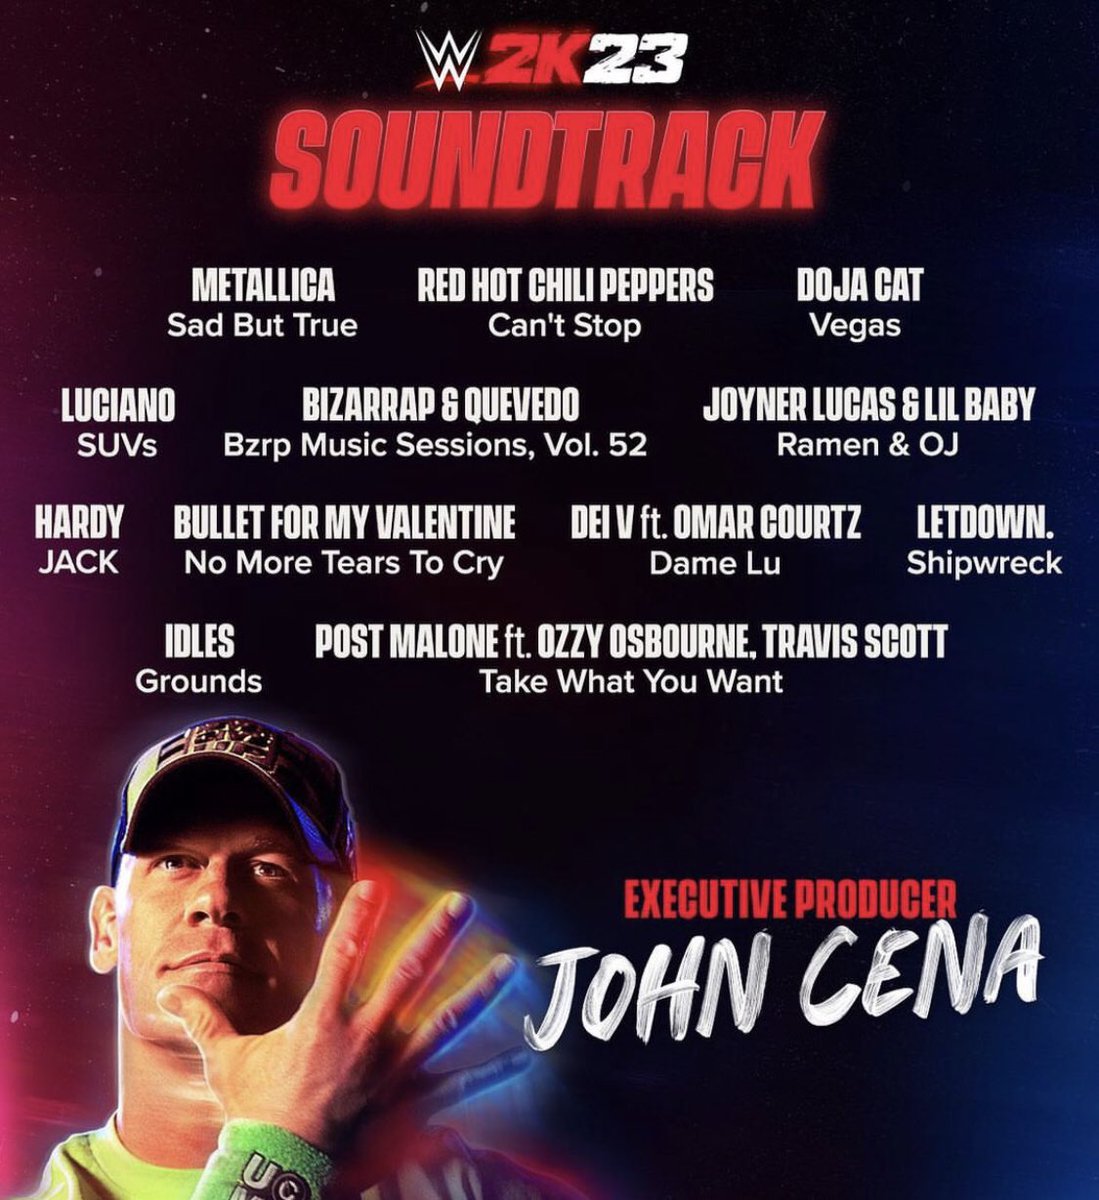 Thoughts on the official soundtrack for #WWE2K23 all handpicked by John Cena?